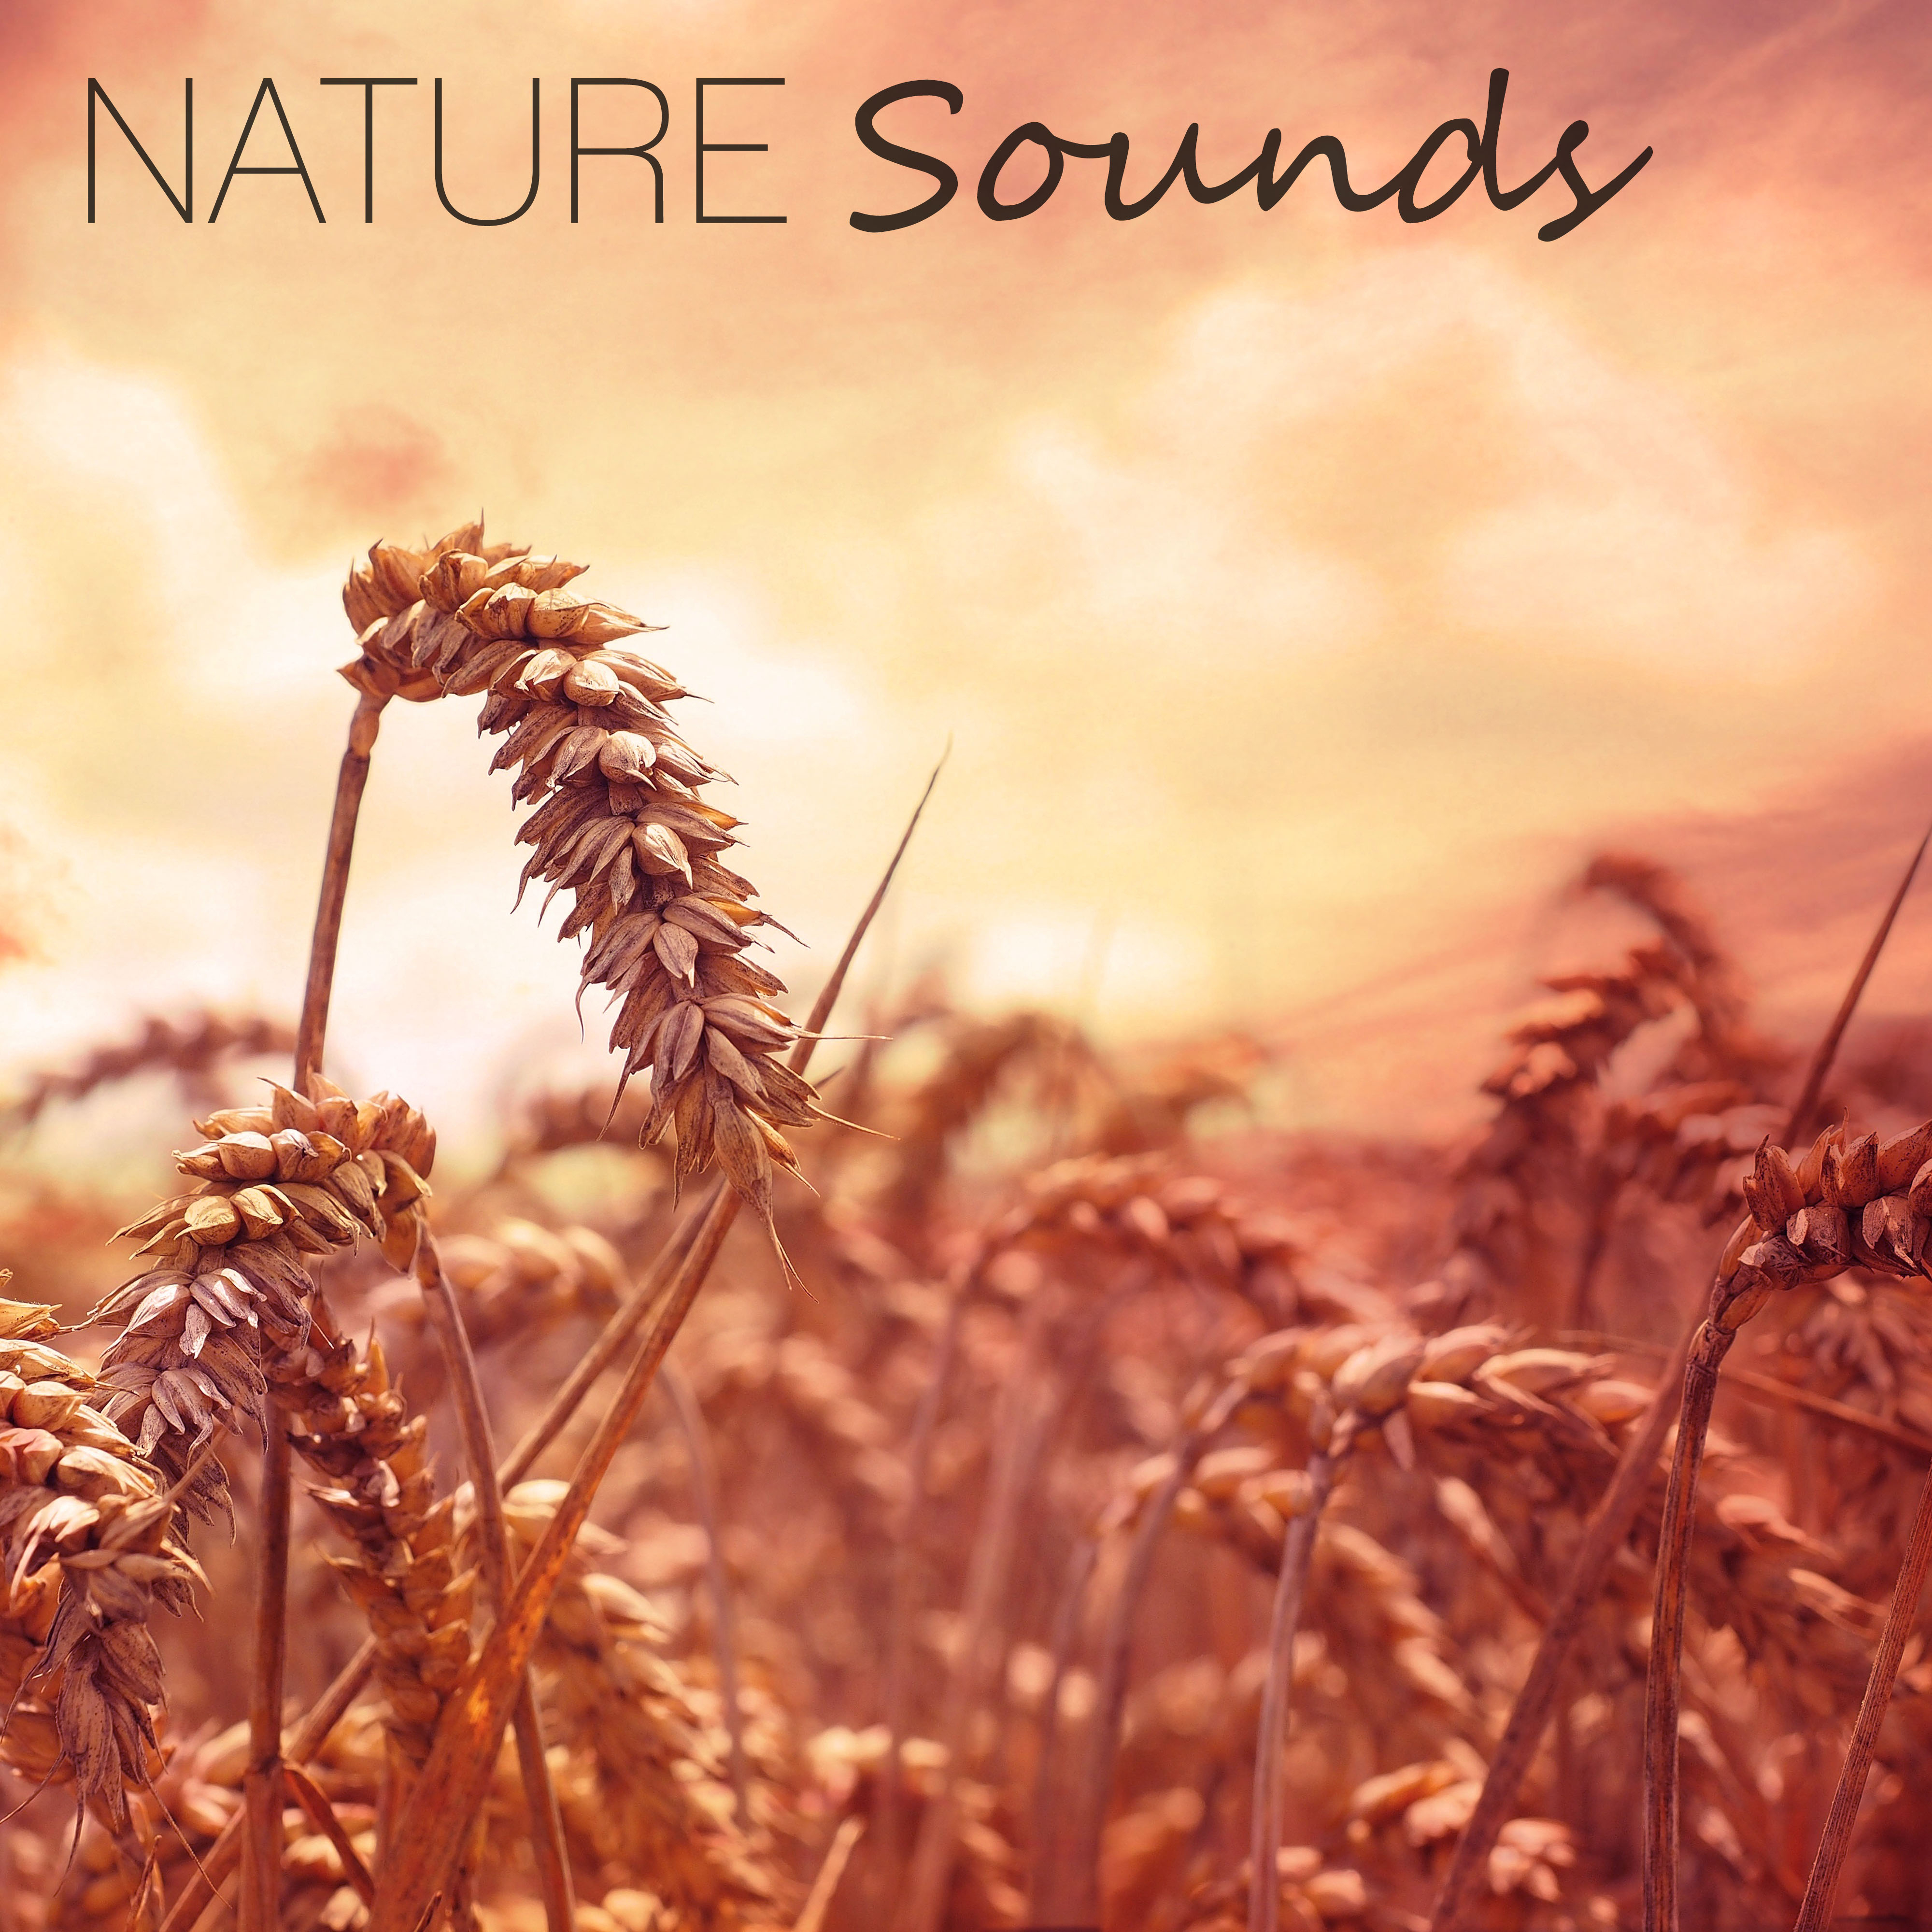 Nature Sounds – New Age Music for Sleep, Relaxation, Meditation, Spa